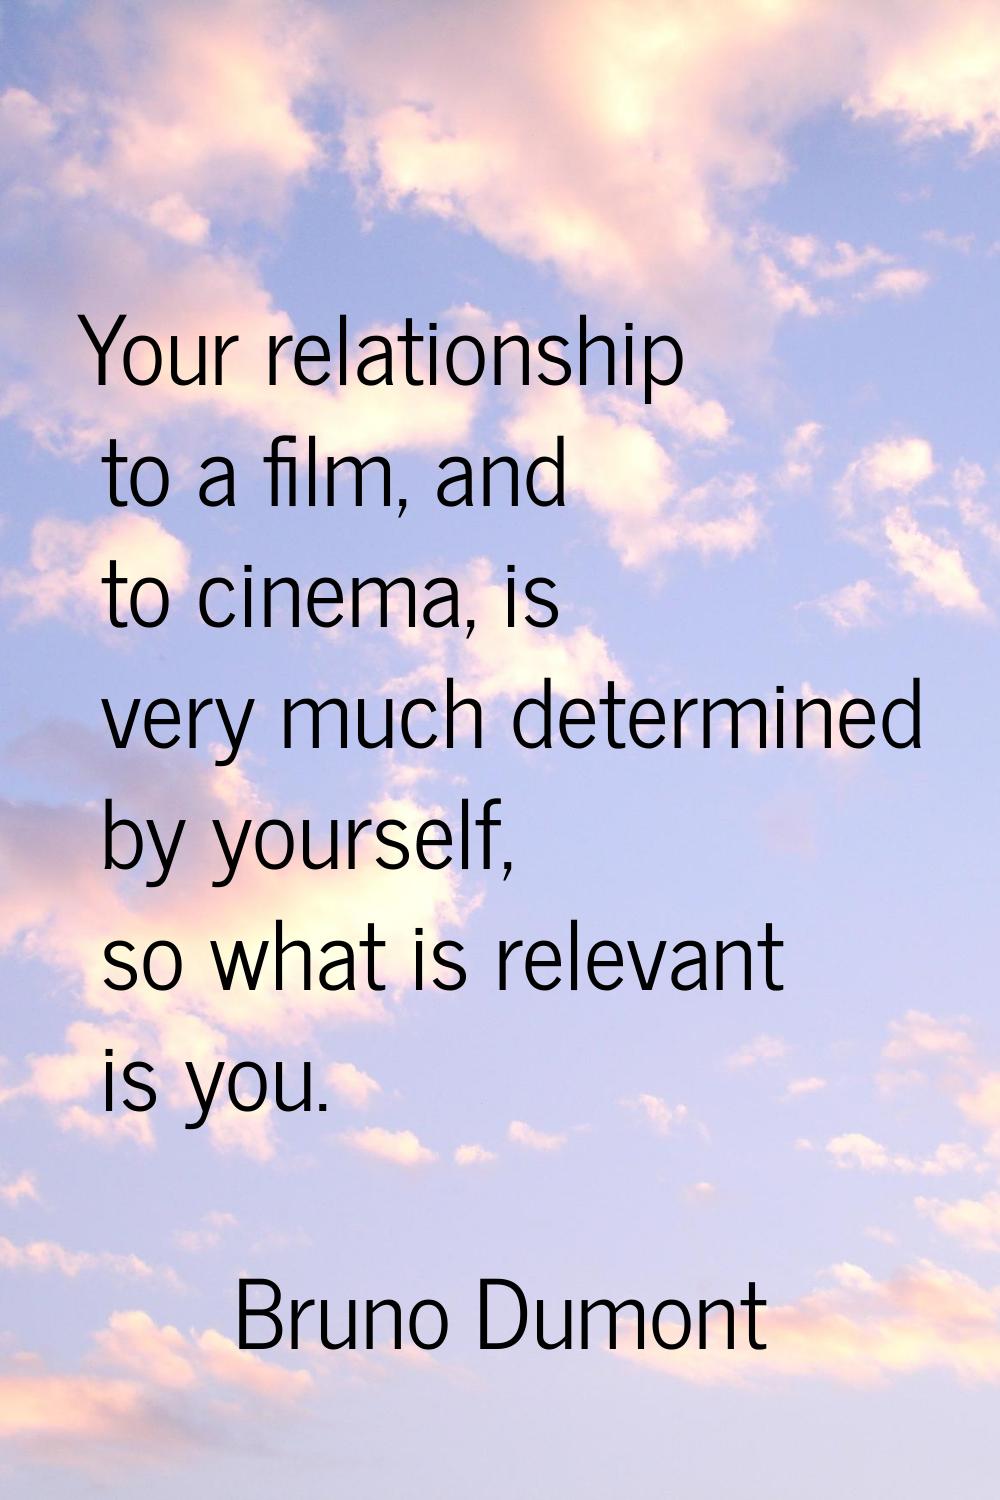 Your relationship to a film, and to cinema, is very much determined by yourself, so what is relevan